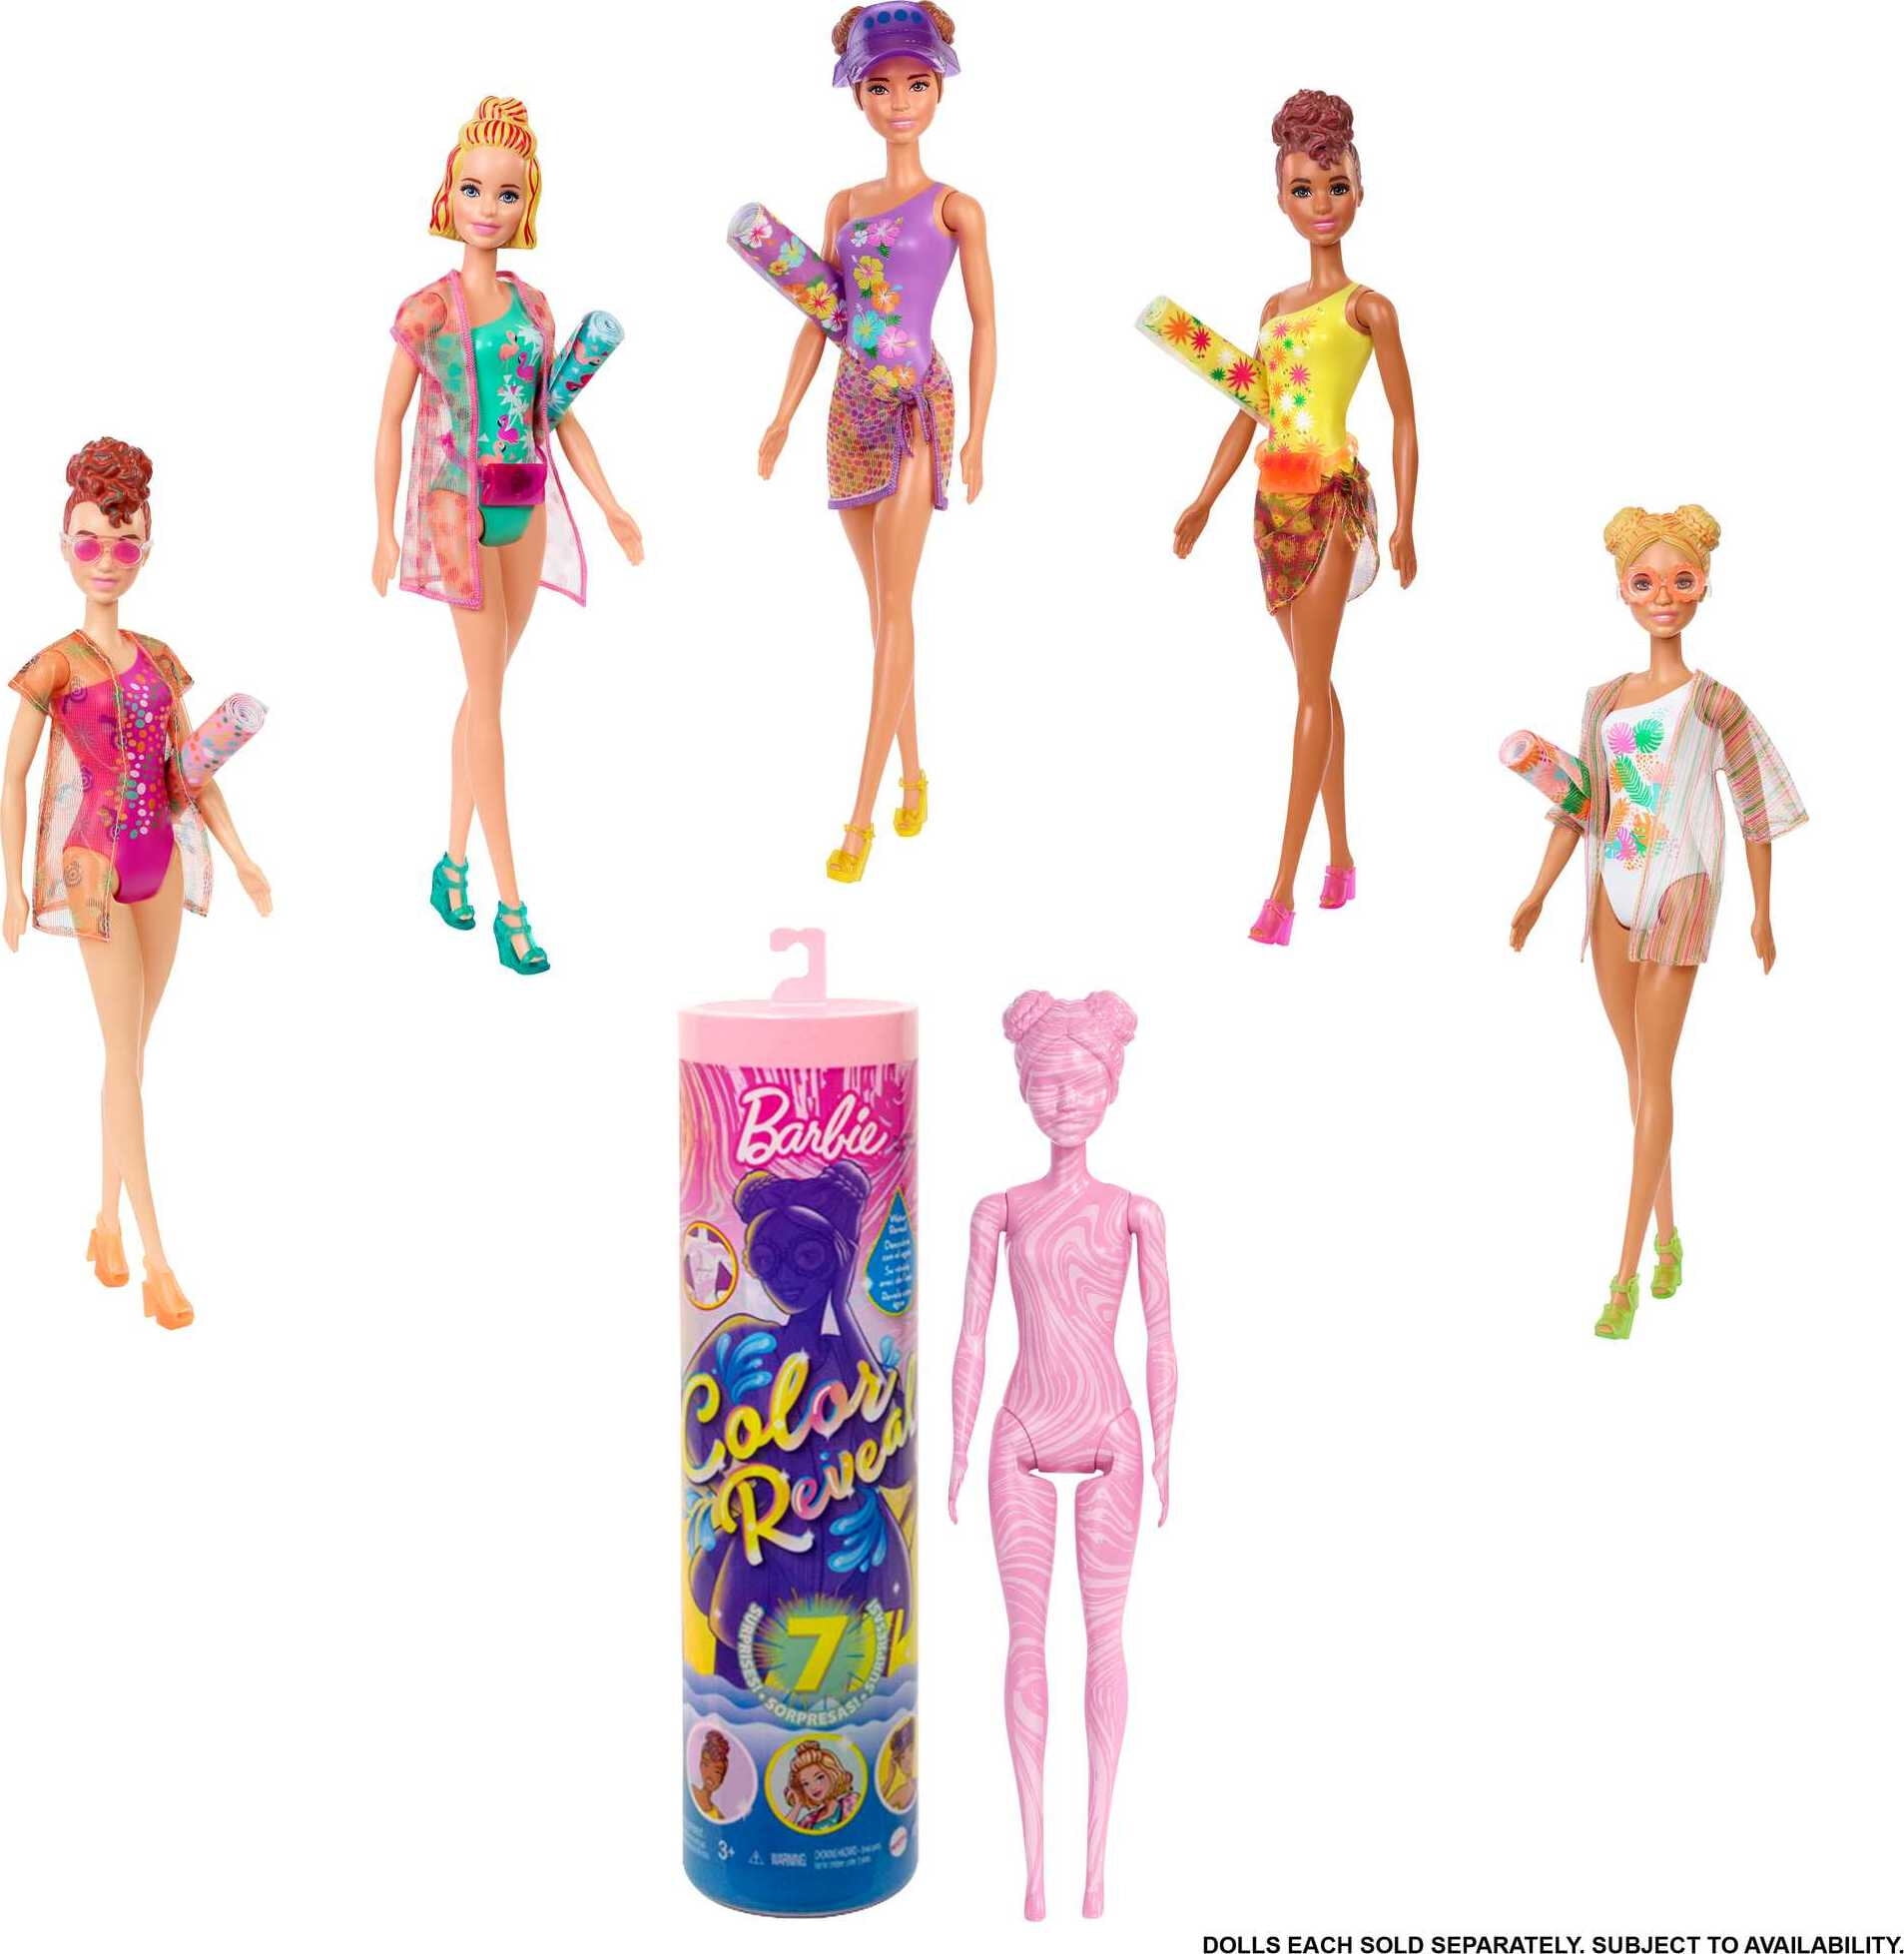 Details about   New Release 2020 Shimmer Series Purple Barbie Color Reveal 7 Surprise Doll HTF